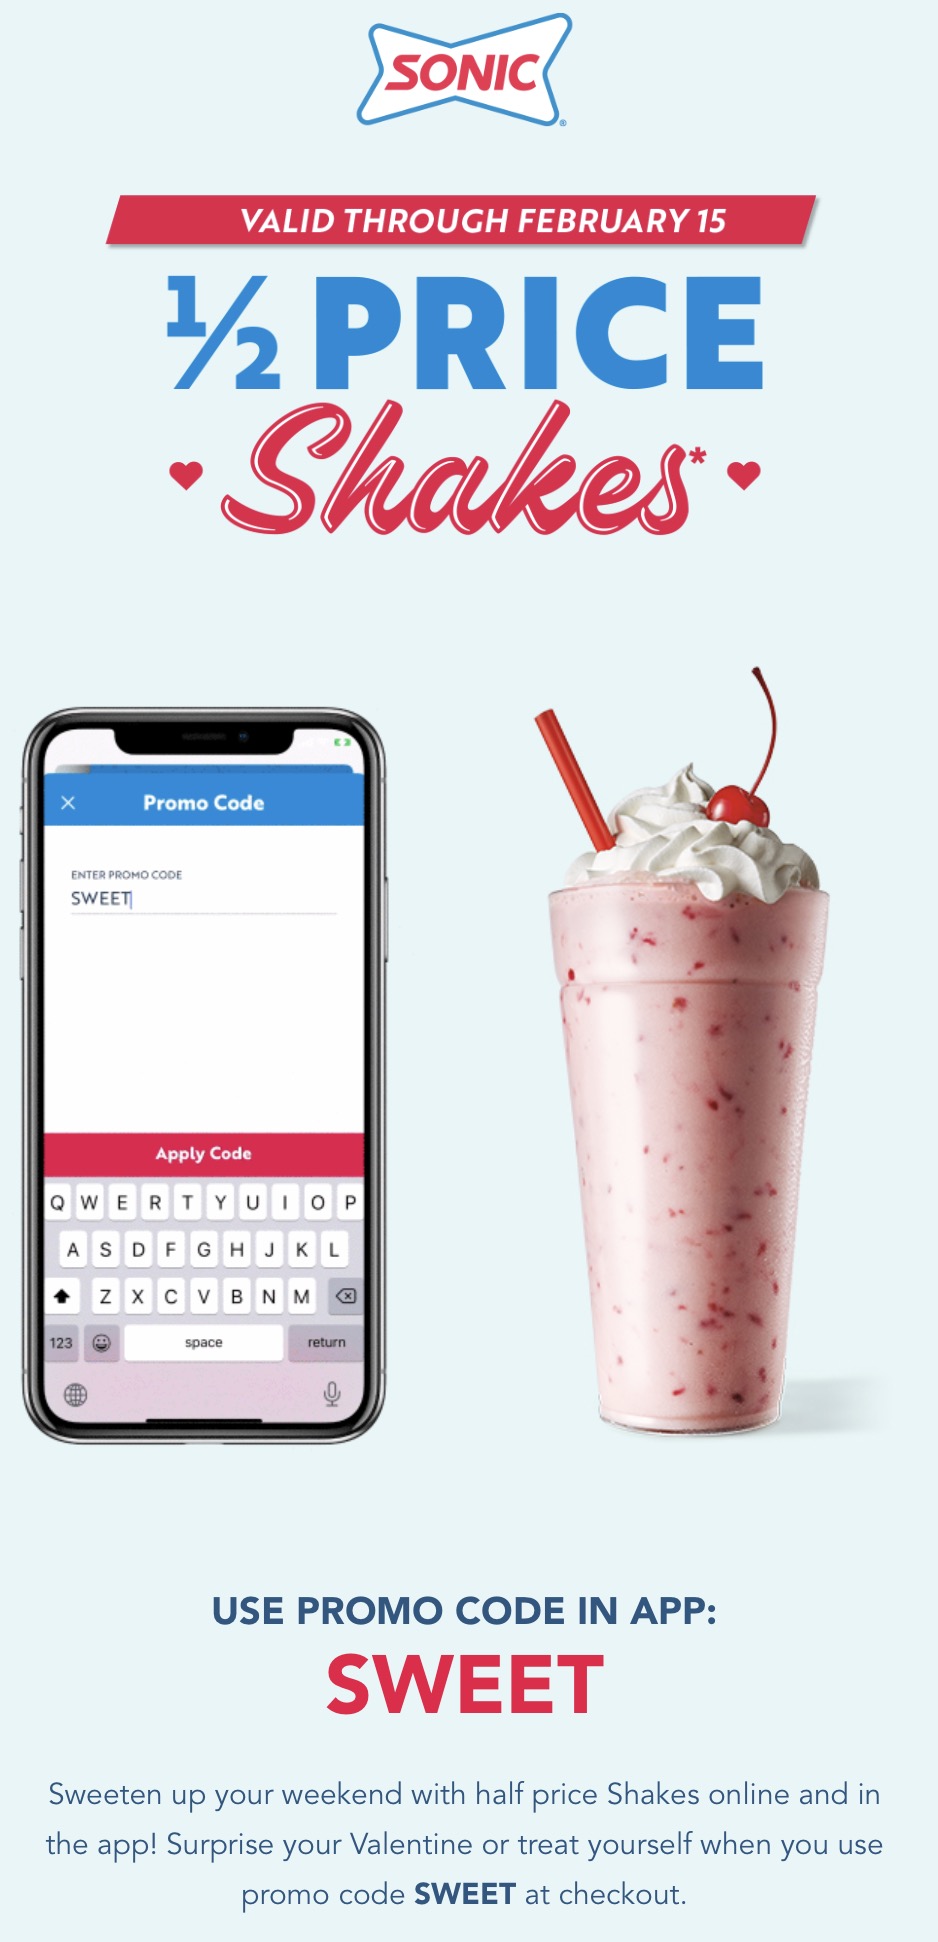 sonic shakes coupon code